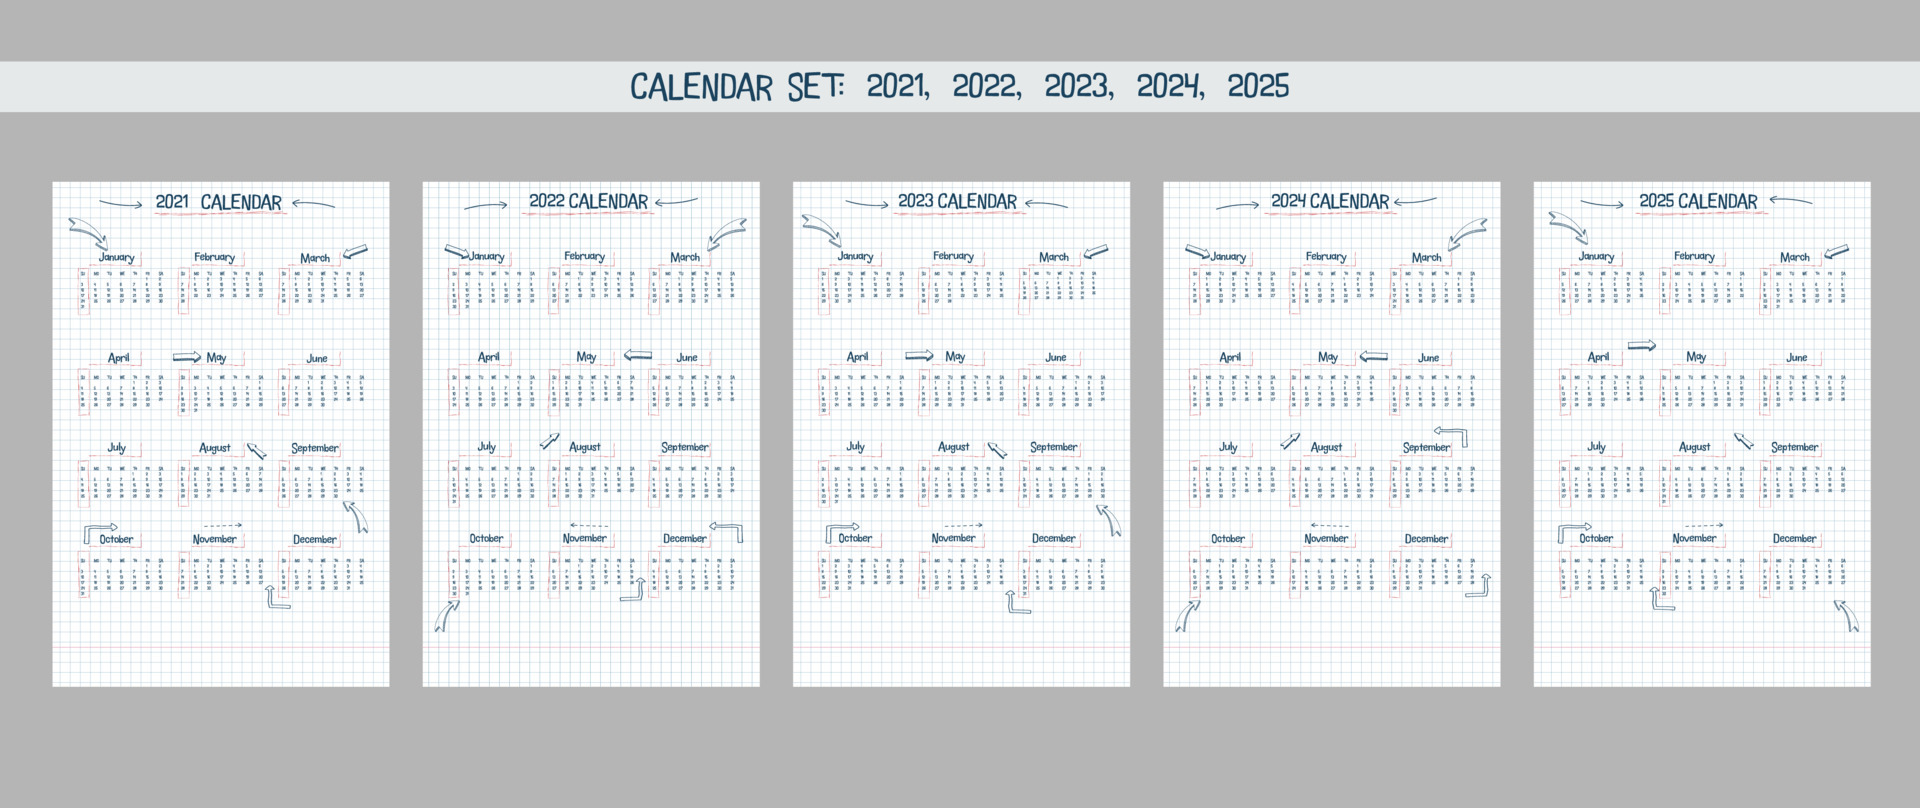 2024-2025 Scps Calendar Scps Calender Customize and Print